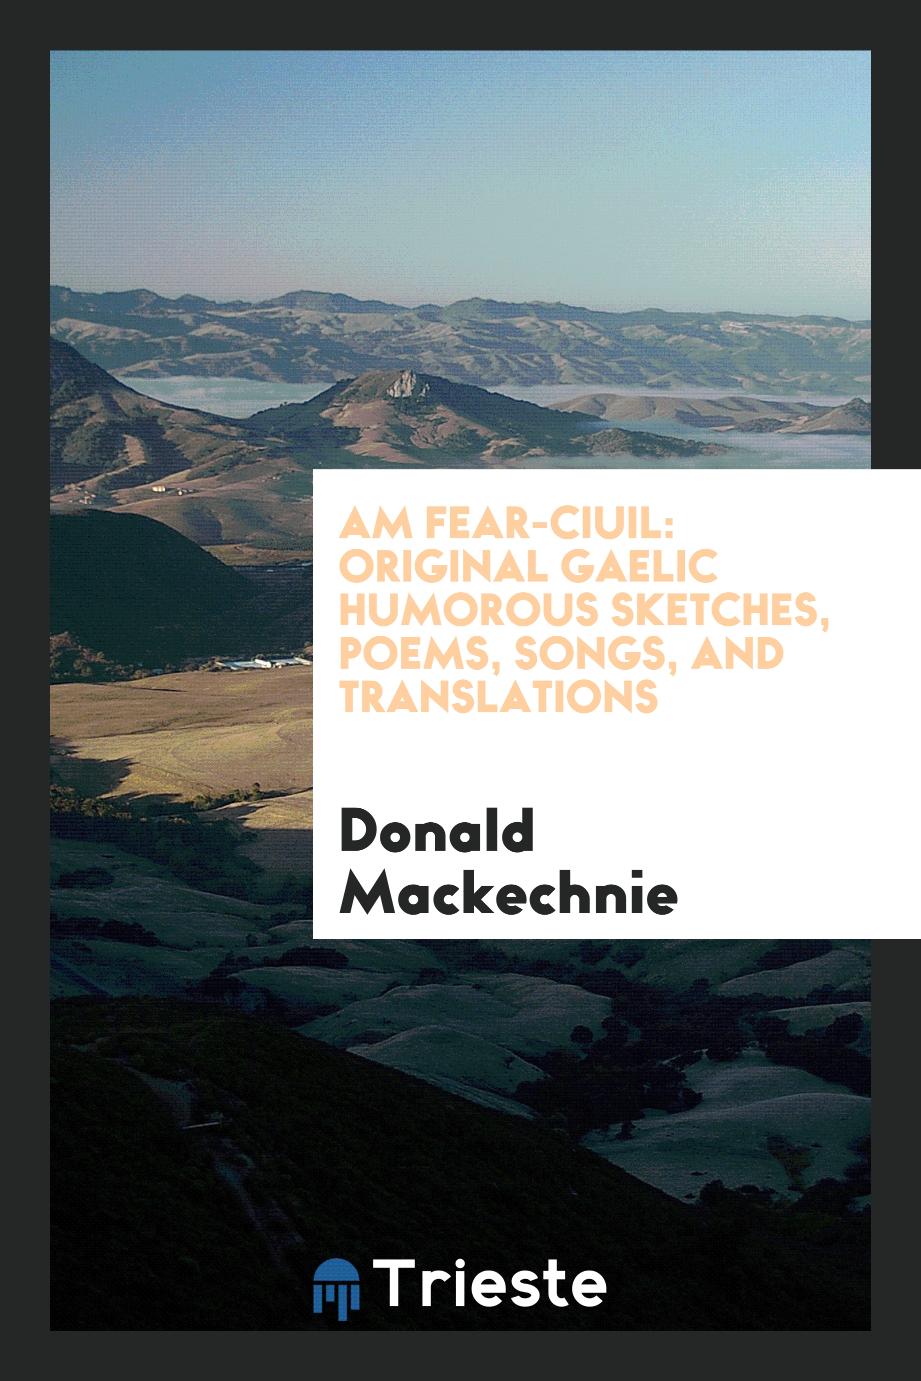 Am Fear-Ciuil: Original Gaelic Humorous Sketches, Poems, Songs, and Translations